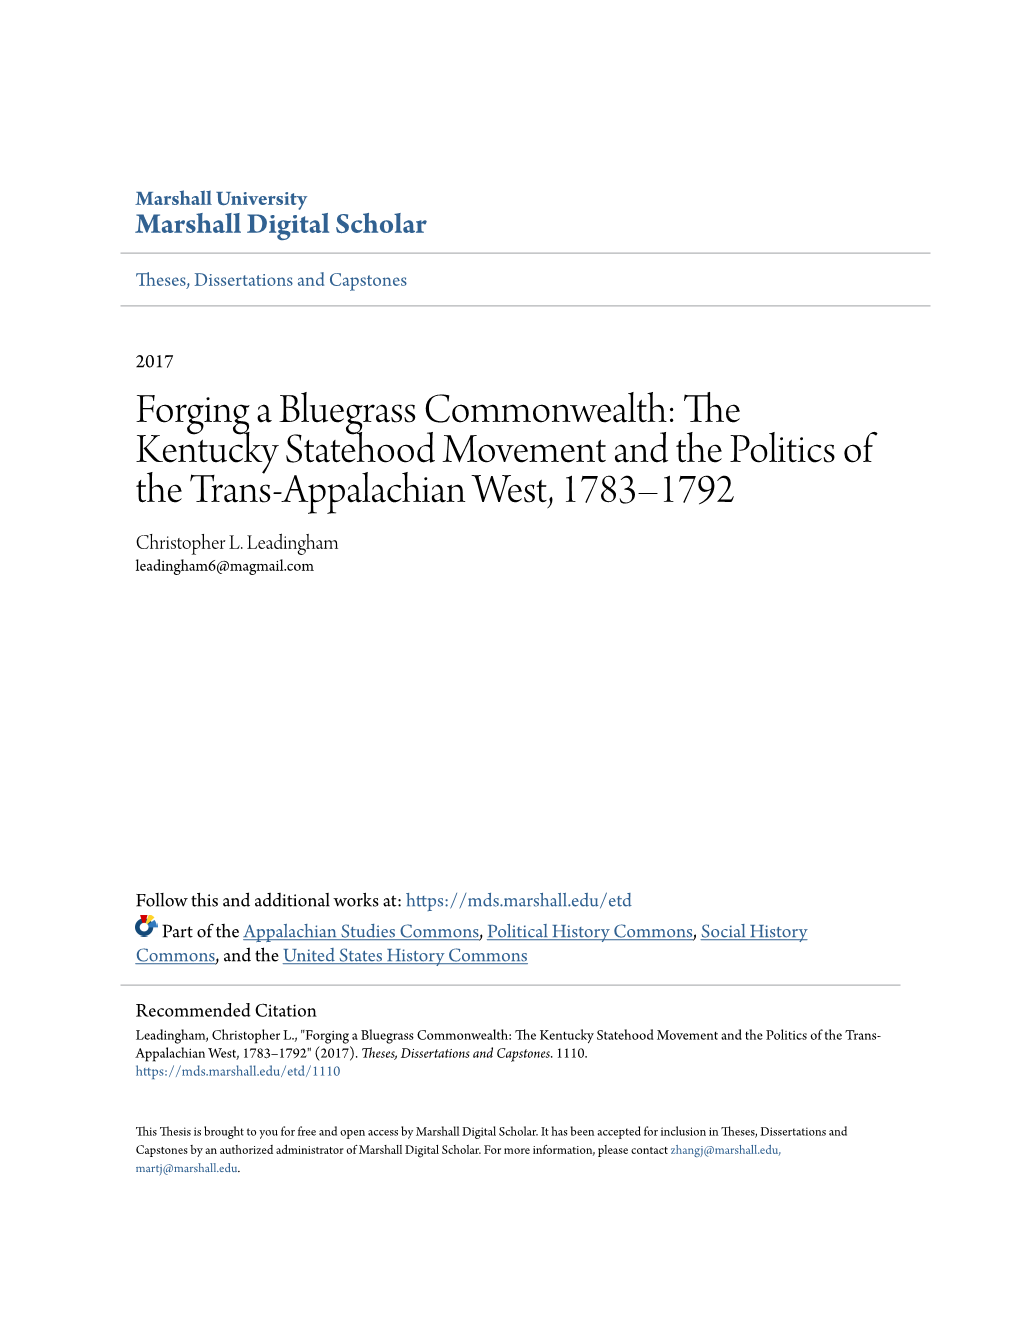 Forging a Bluegrass Commonwealth: the Kentucky Statehood Movement and the Politics of the Trans-Appalachian West, 1783–1792 Christopher L